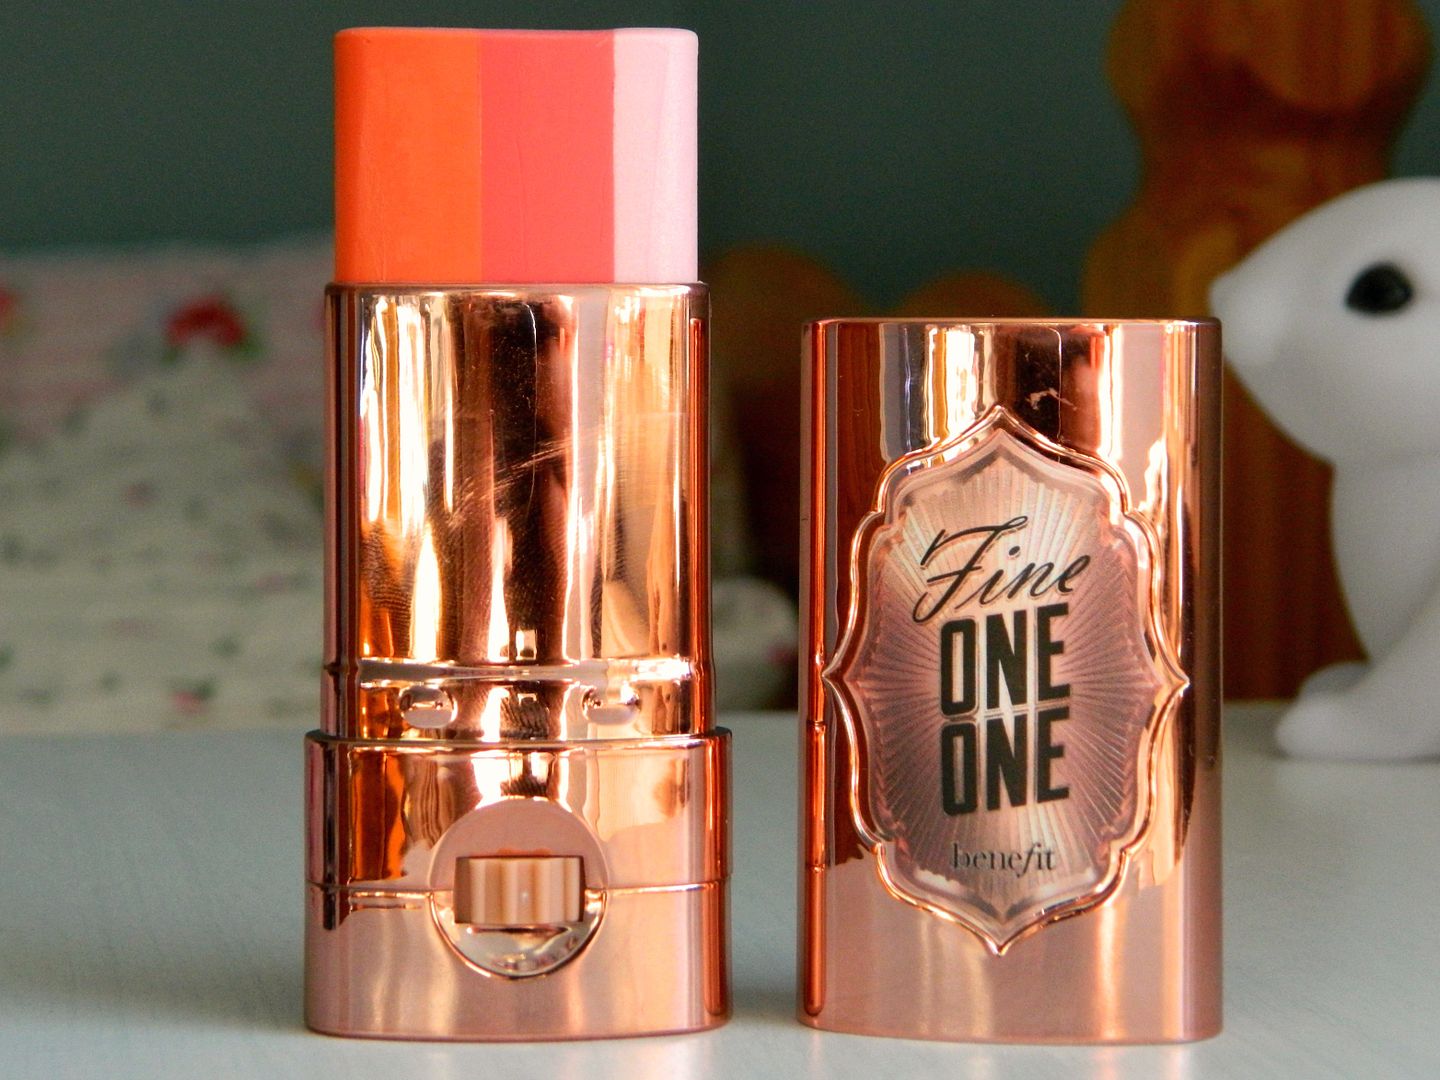 Benefit Fine One One Shades Review Belle-amie